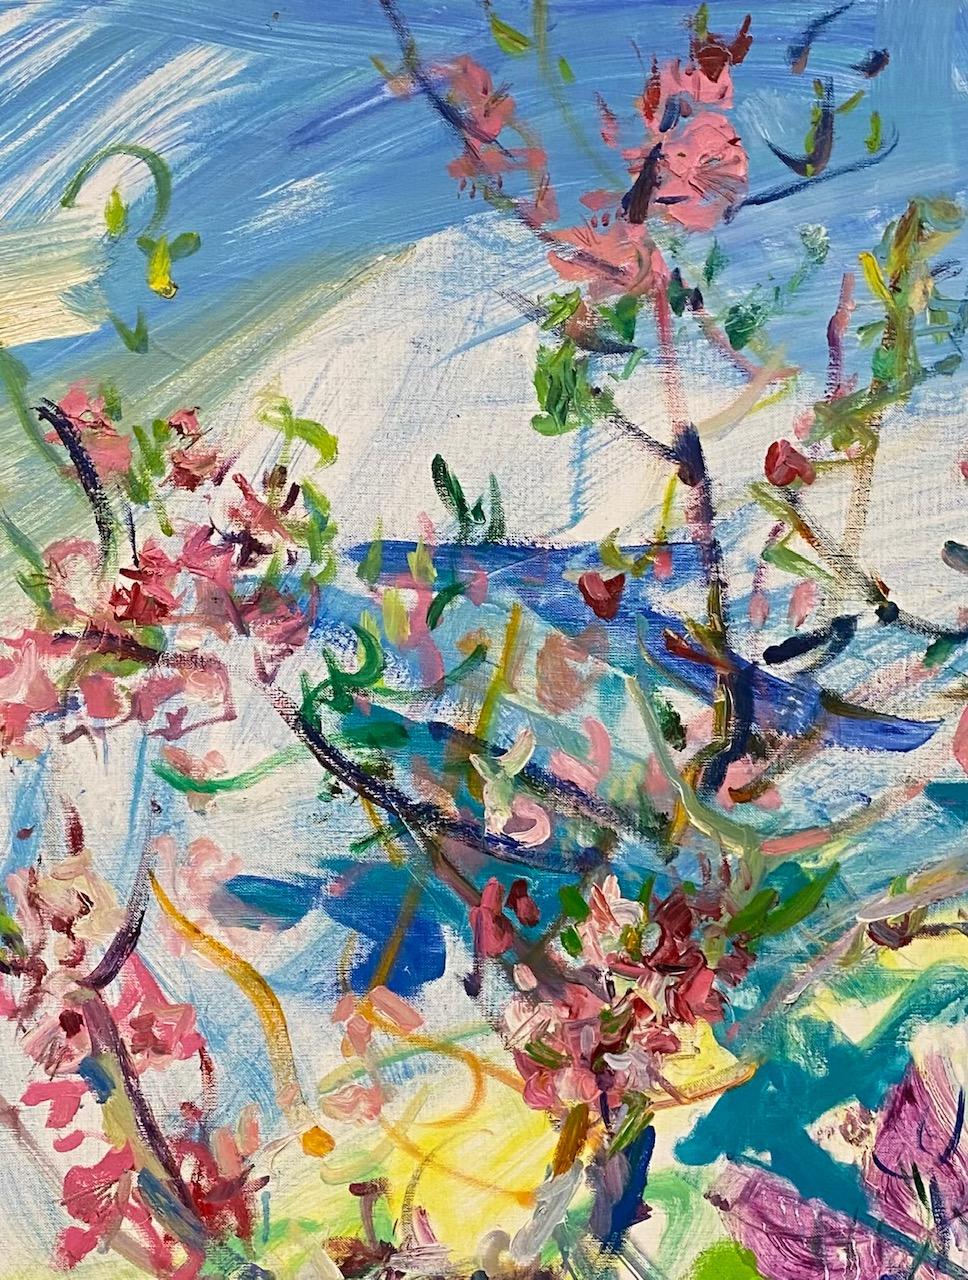 Island Winds of Italy, paysage floral expressionniste abstrait, 48x36 - Expressionnisme abstrait Painting par Sonia Grineva